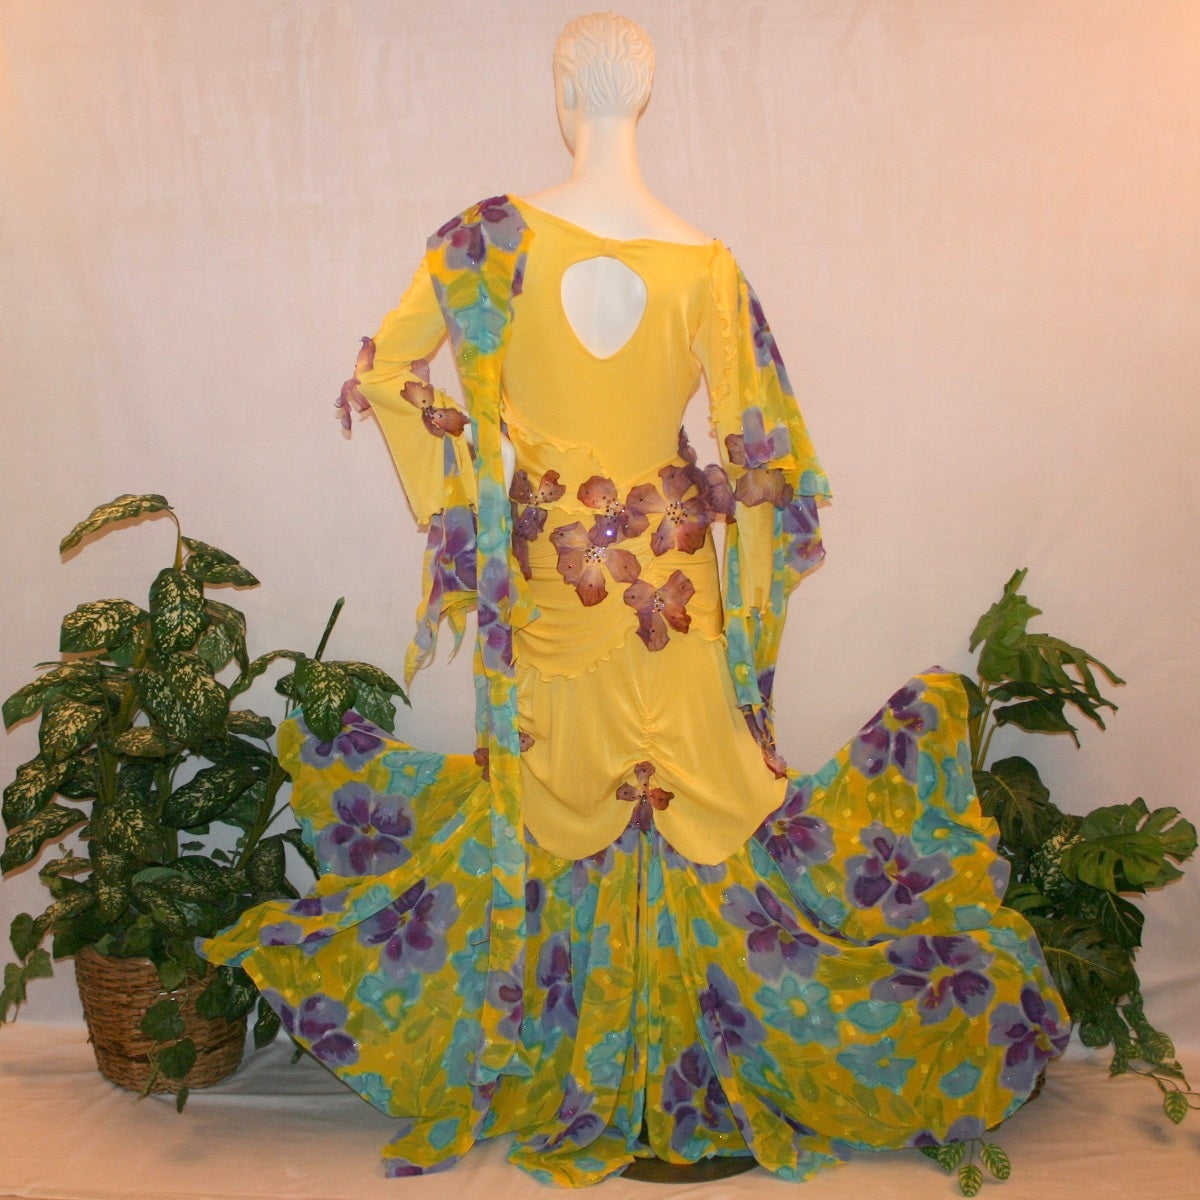 Crystal's Creations back view of Yellow ballroom dress created of luxurious yellow slinky with yards of flower printed textured chiffon of yellow, orchids & blues is embellished with deep orchid silk flowers that have rhinestone work in shades of orchid